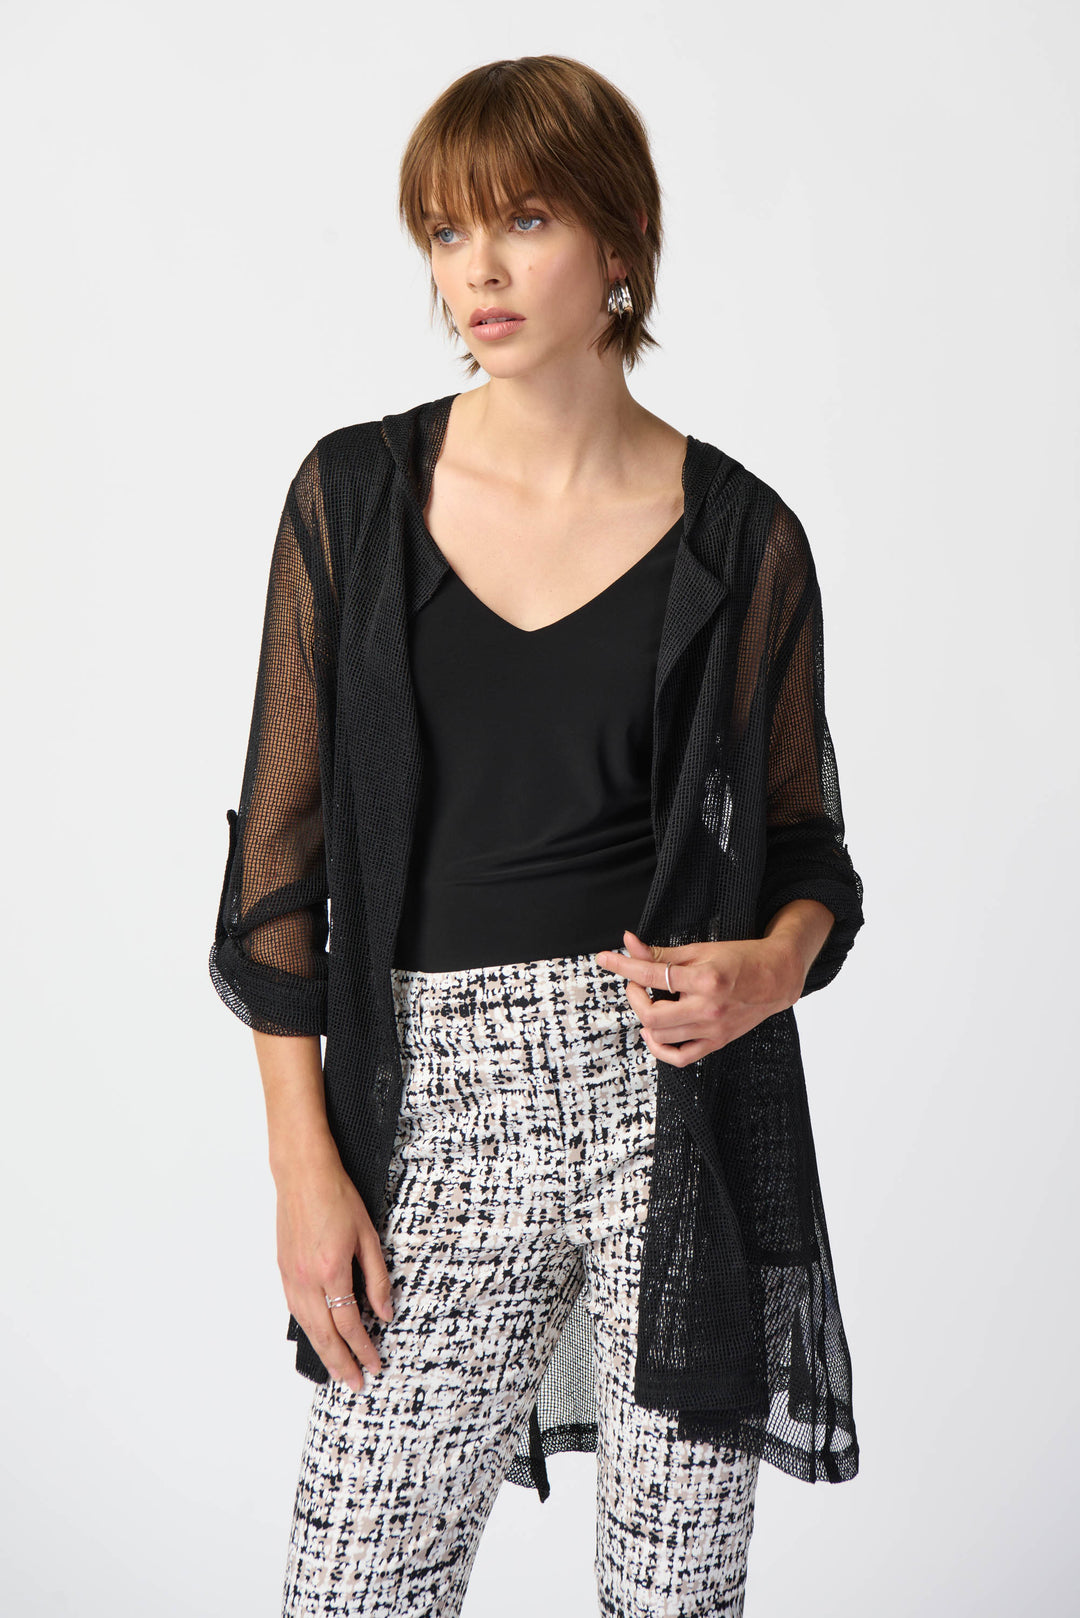 This super light and free flowing 'fishnet' cardigan is perfect for adding a touch of edginess to any outfit. 